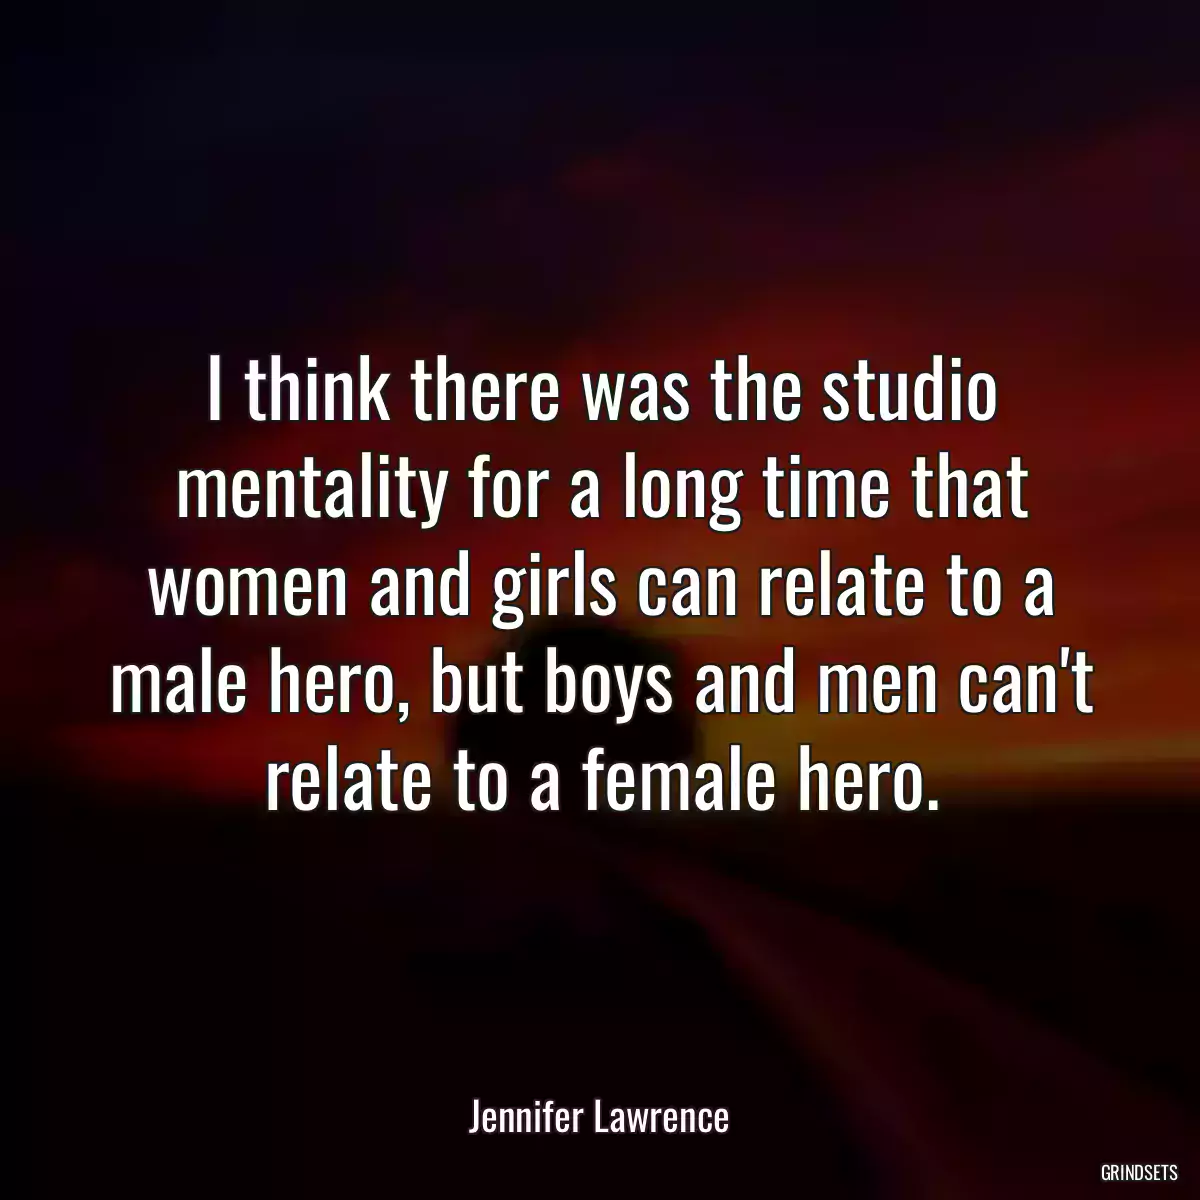 I think there was the studio mentality for a long time that women and girls can relate to a male hero, but boys and men can\'t relate to a female hero.